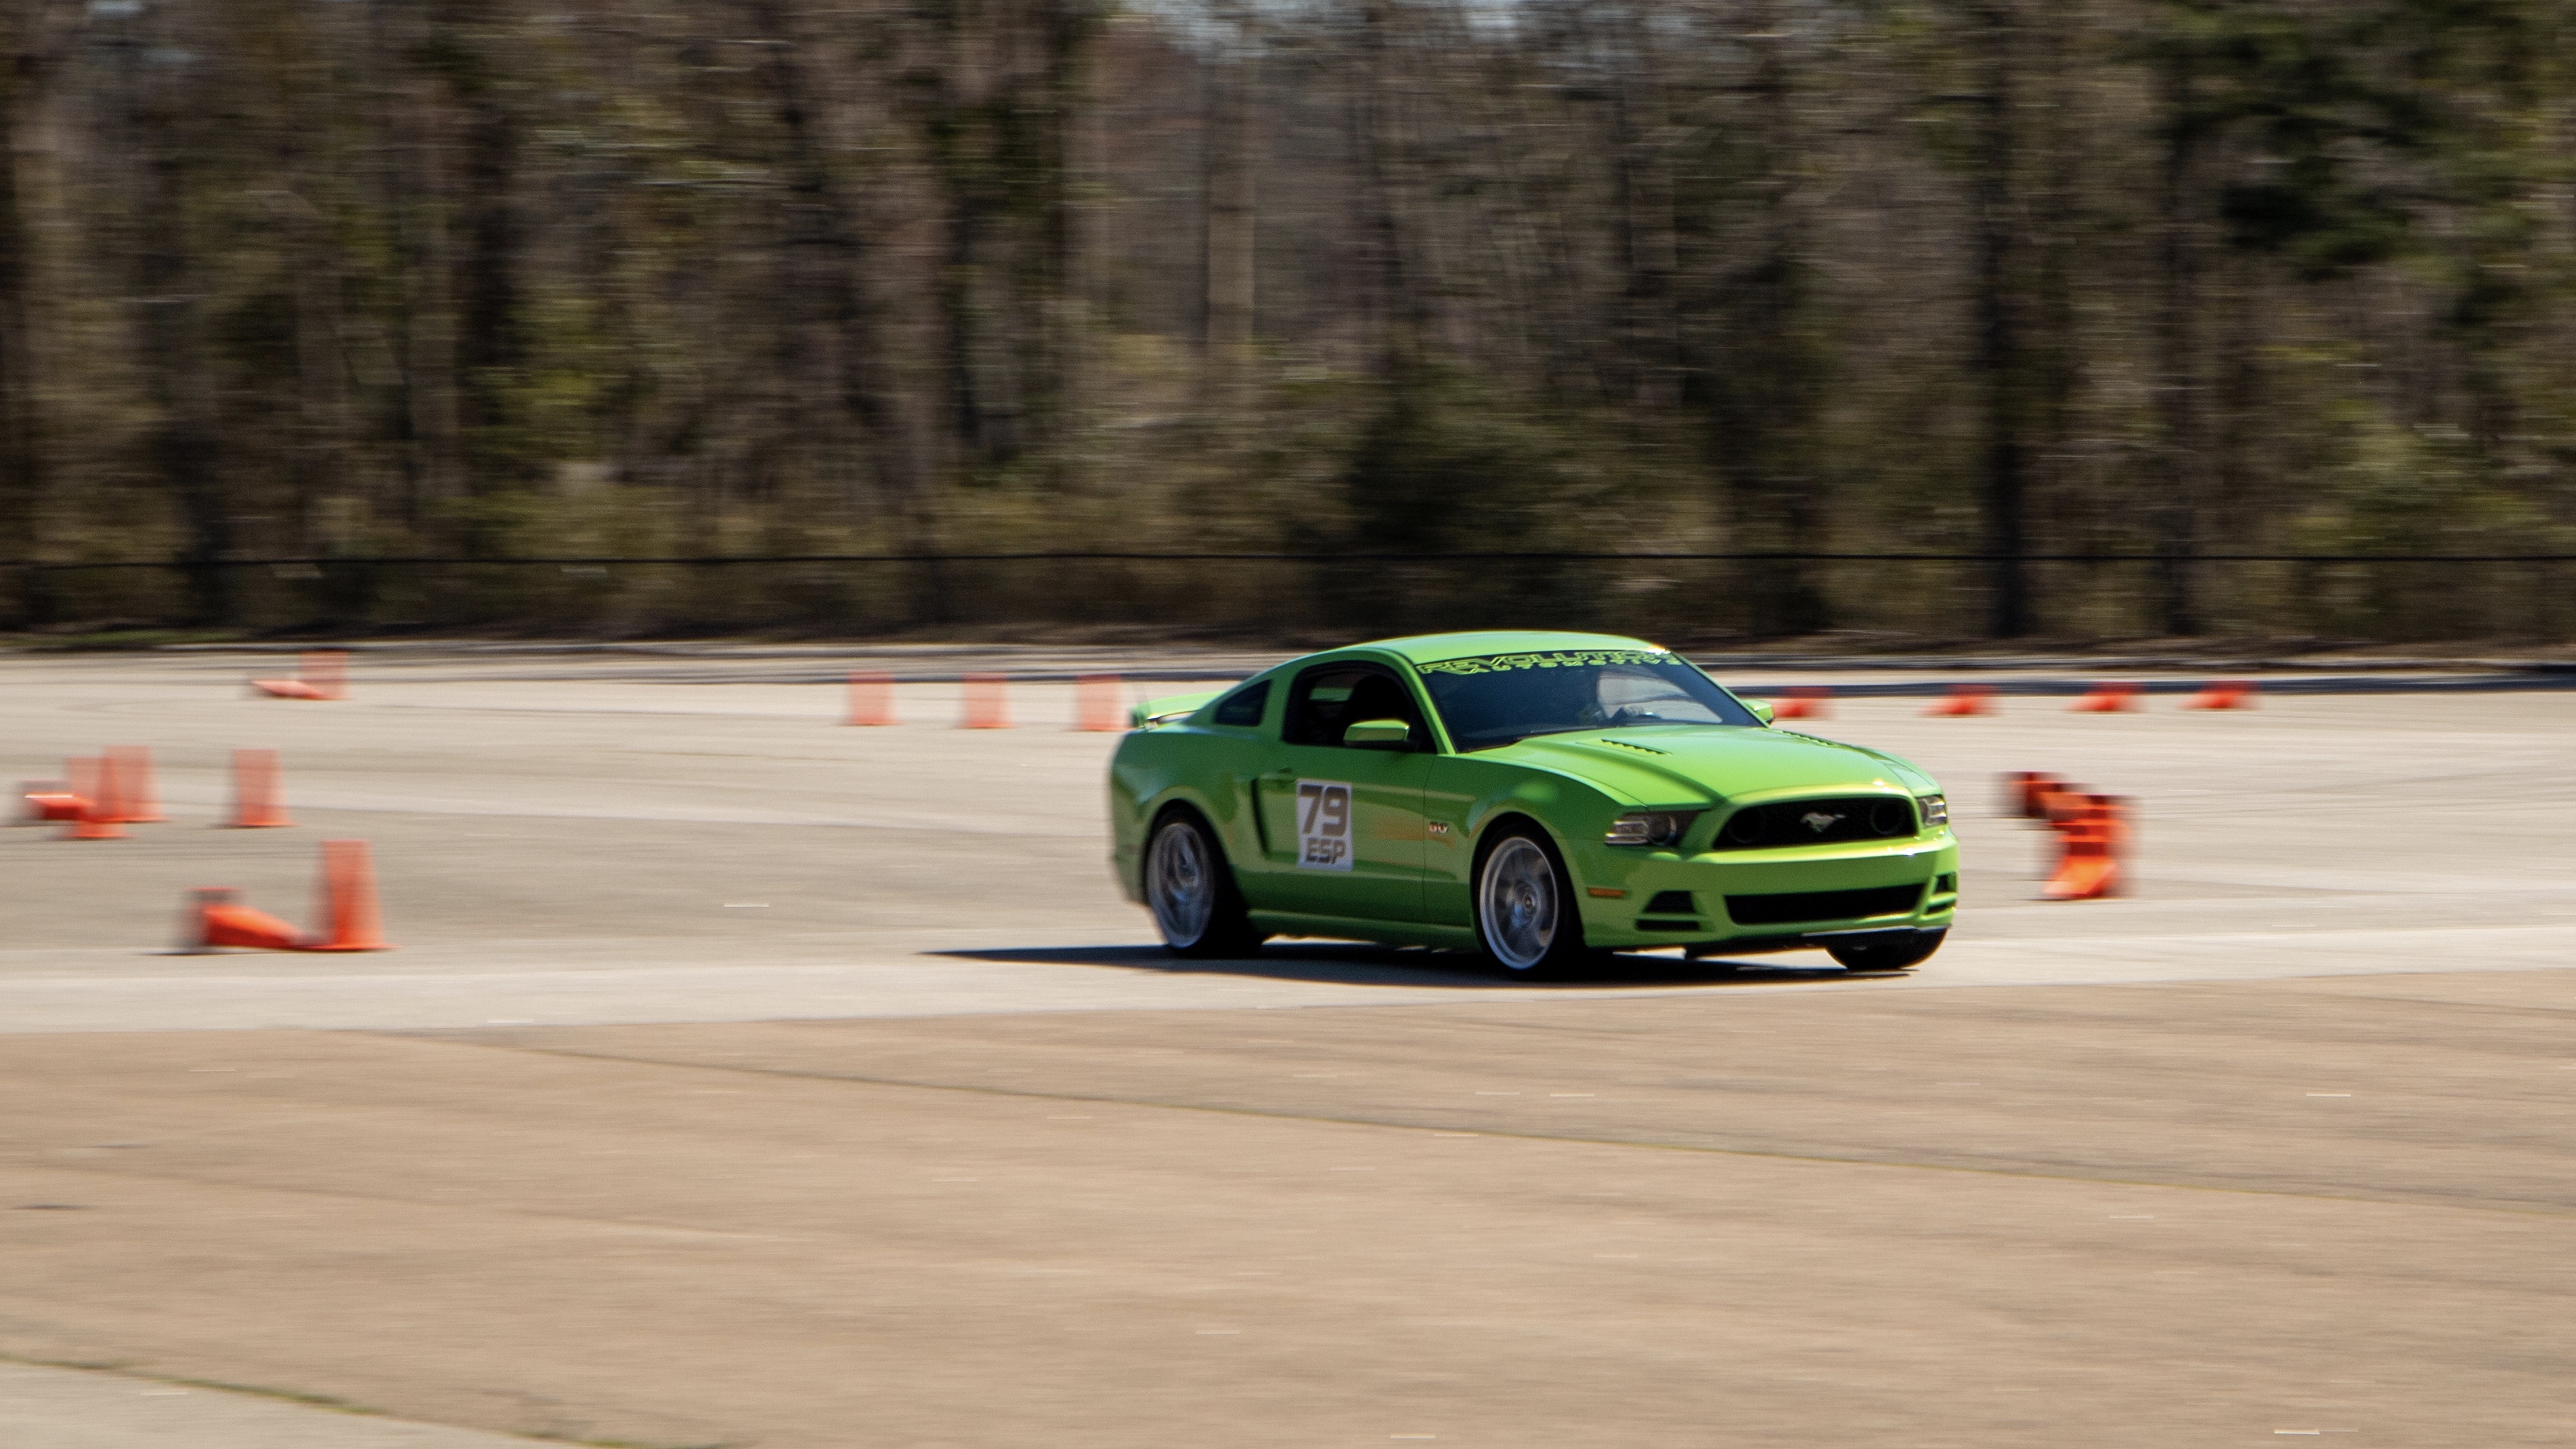 2013 Mustang
GT_50L AutoX -  (Straight Line to Corners)